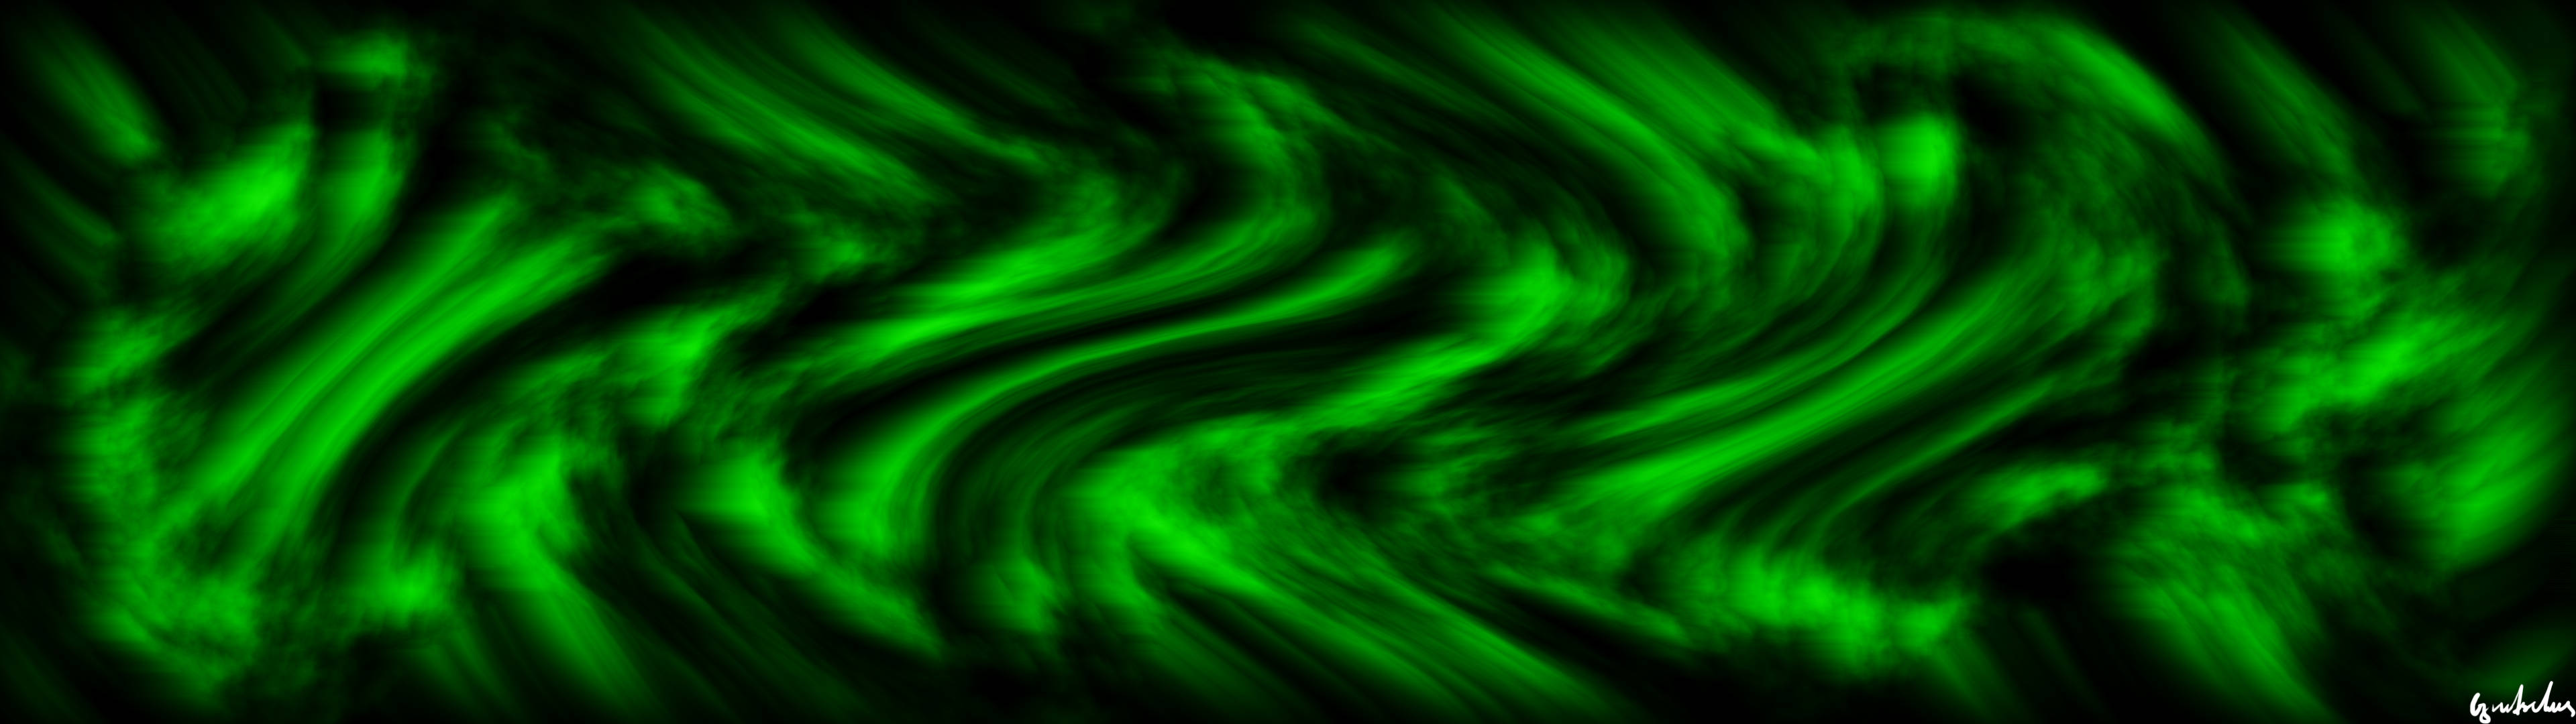 Black And Green Wavy Vertical